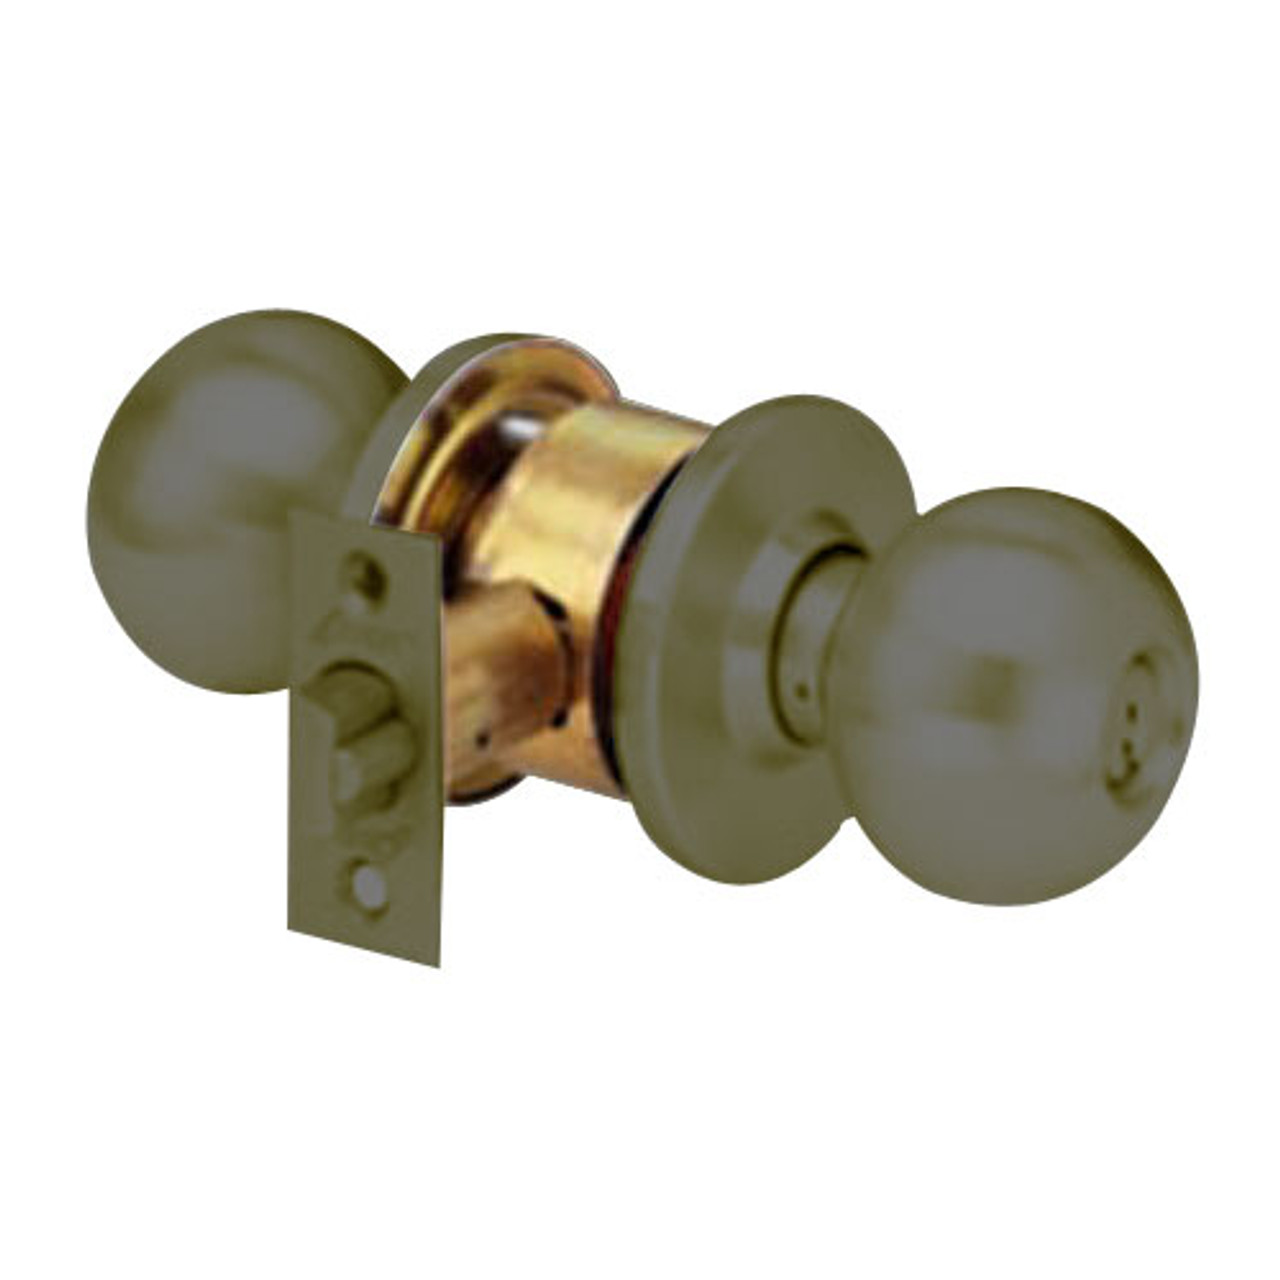 MK11-TA-10B Arrow Lock MK Series Cylindrical Locksets Single Cylinder for Entrance/Office with TA Knob in Oil Rubbed Bronze Finish